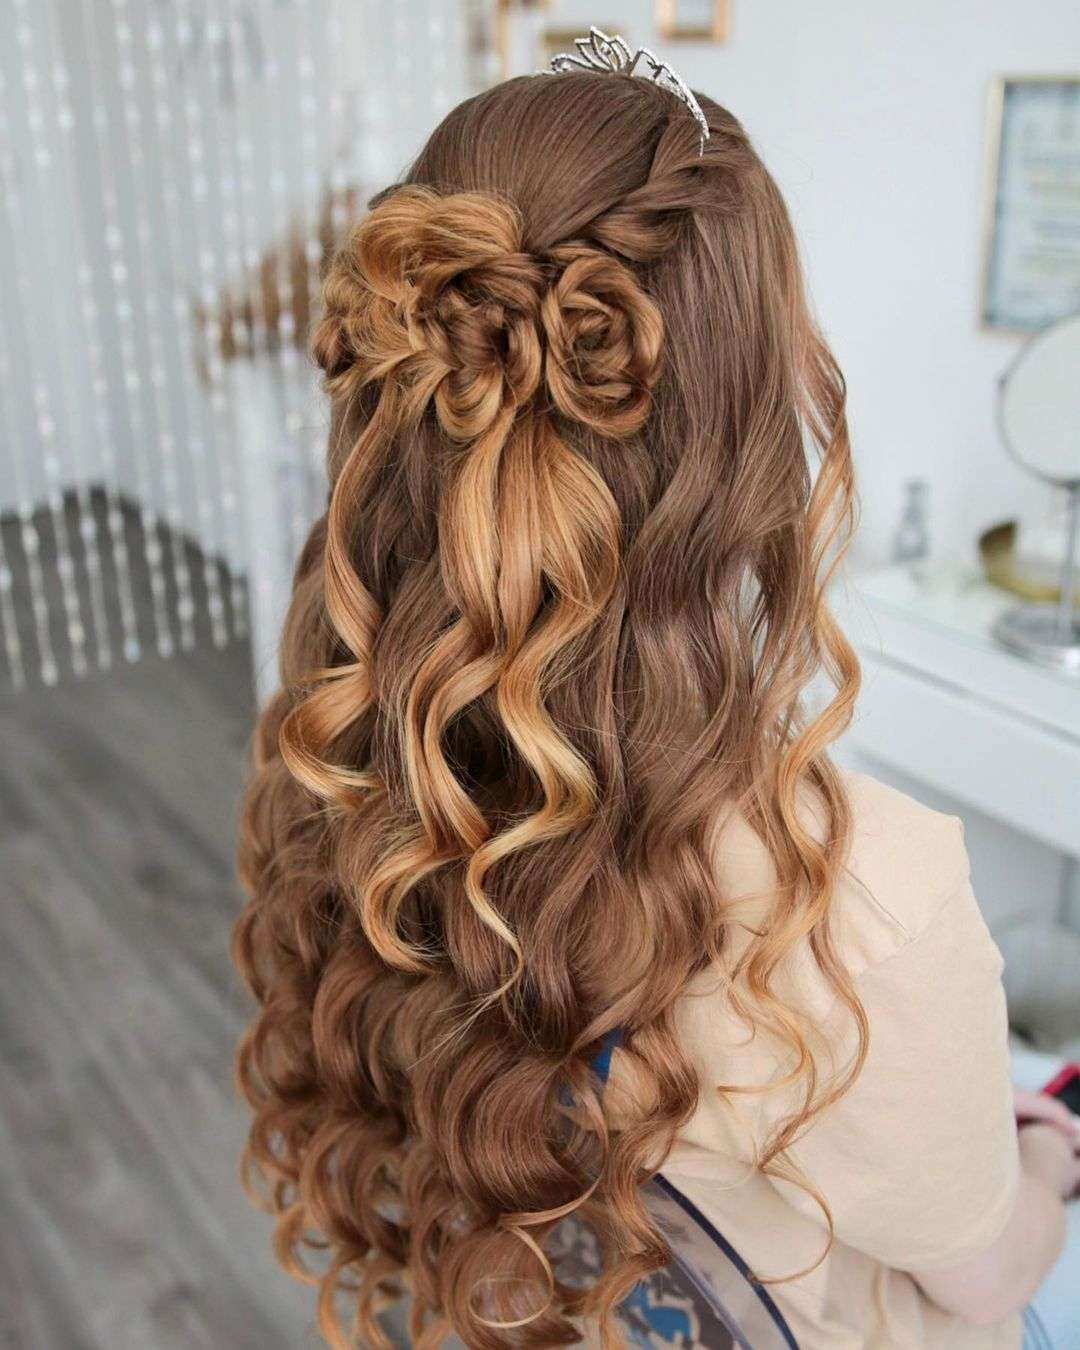 Easy Prom Hairstyles Half Up Half Down - Stylish Life for Moms